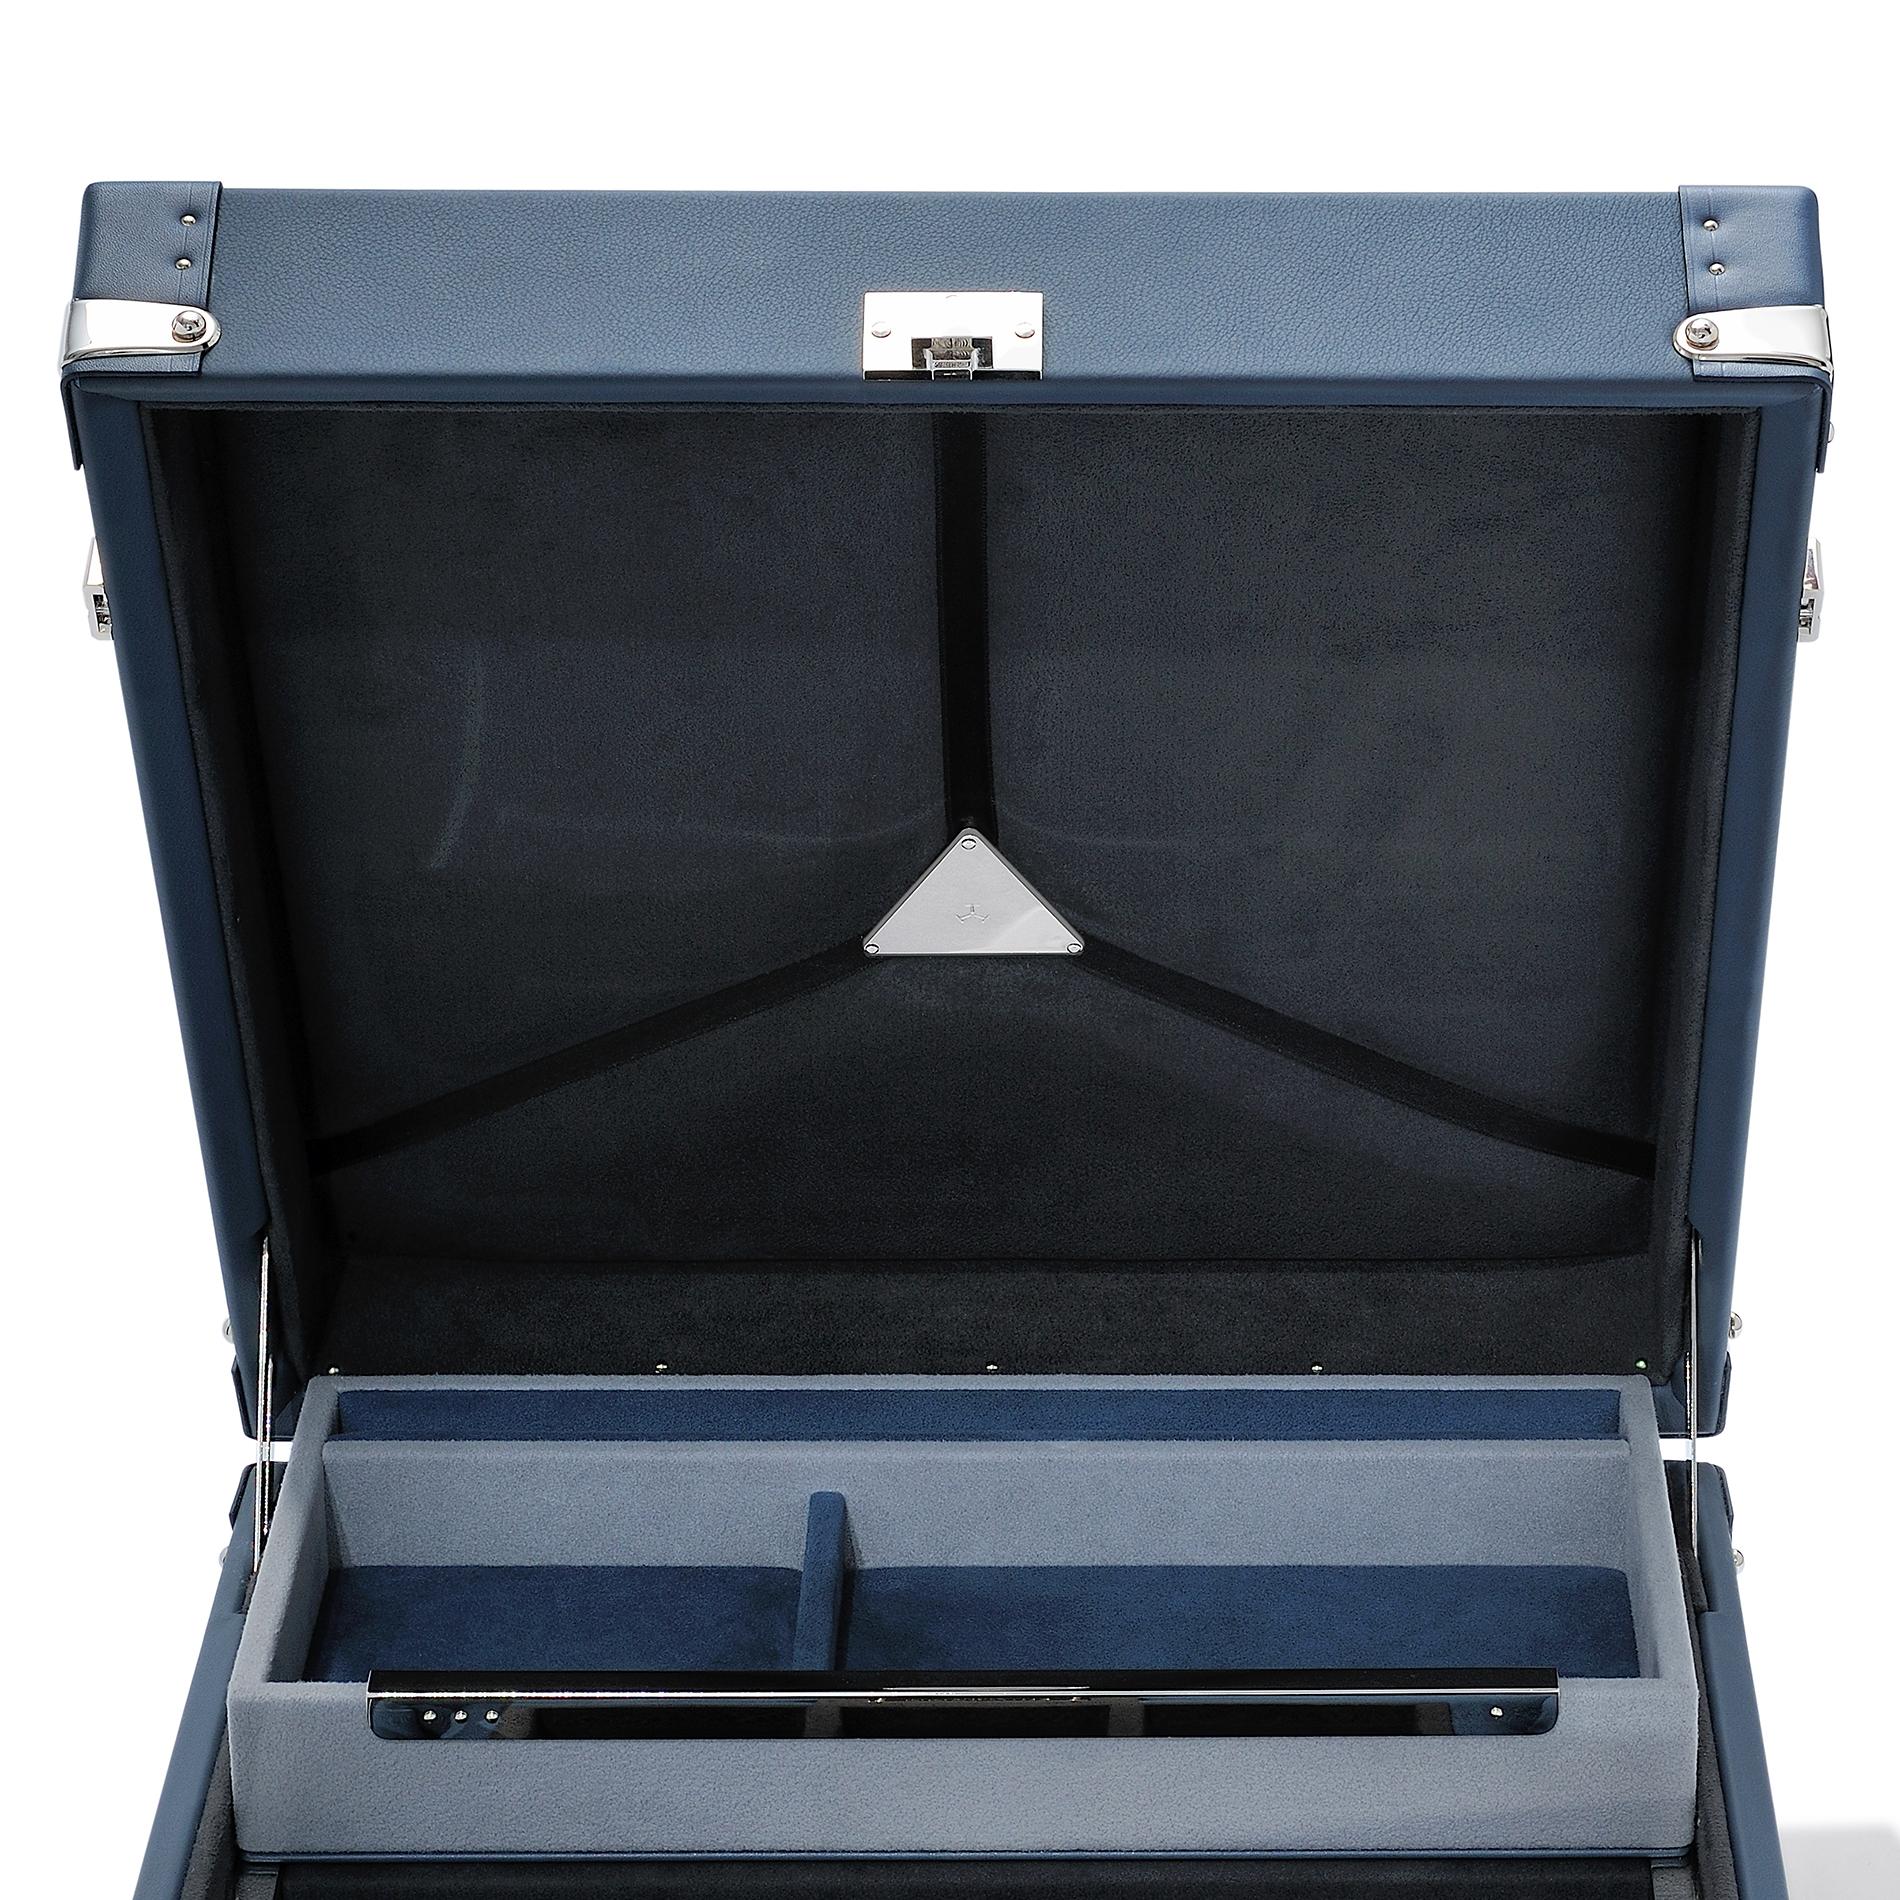 Suitcase luxury watch blue covered with blue cowhide leather
sheathing, box with details and finishings in polished nickel-plated
brass. Upholstery and padding in dinamica Slate black and silver
grey microfiber. With three foamed housings for